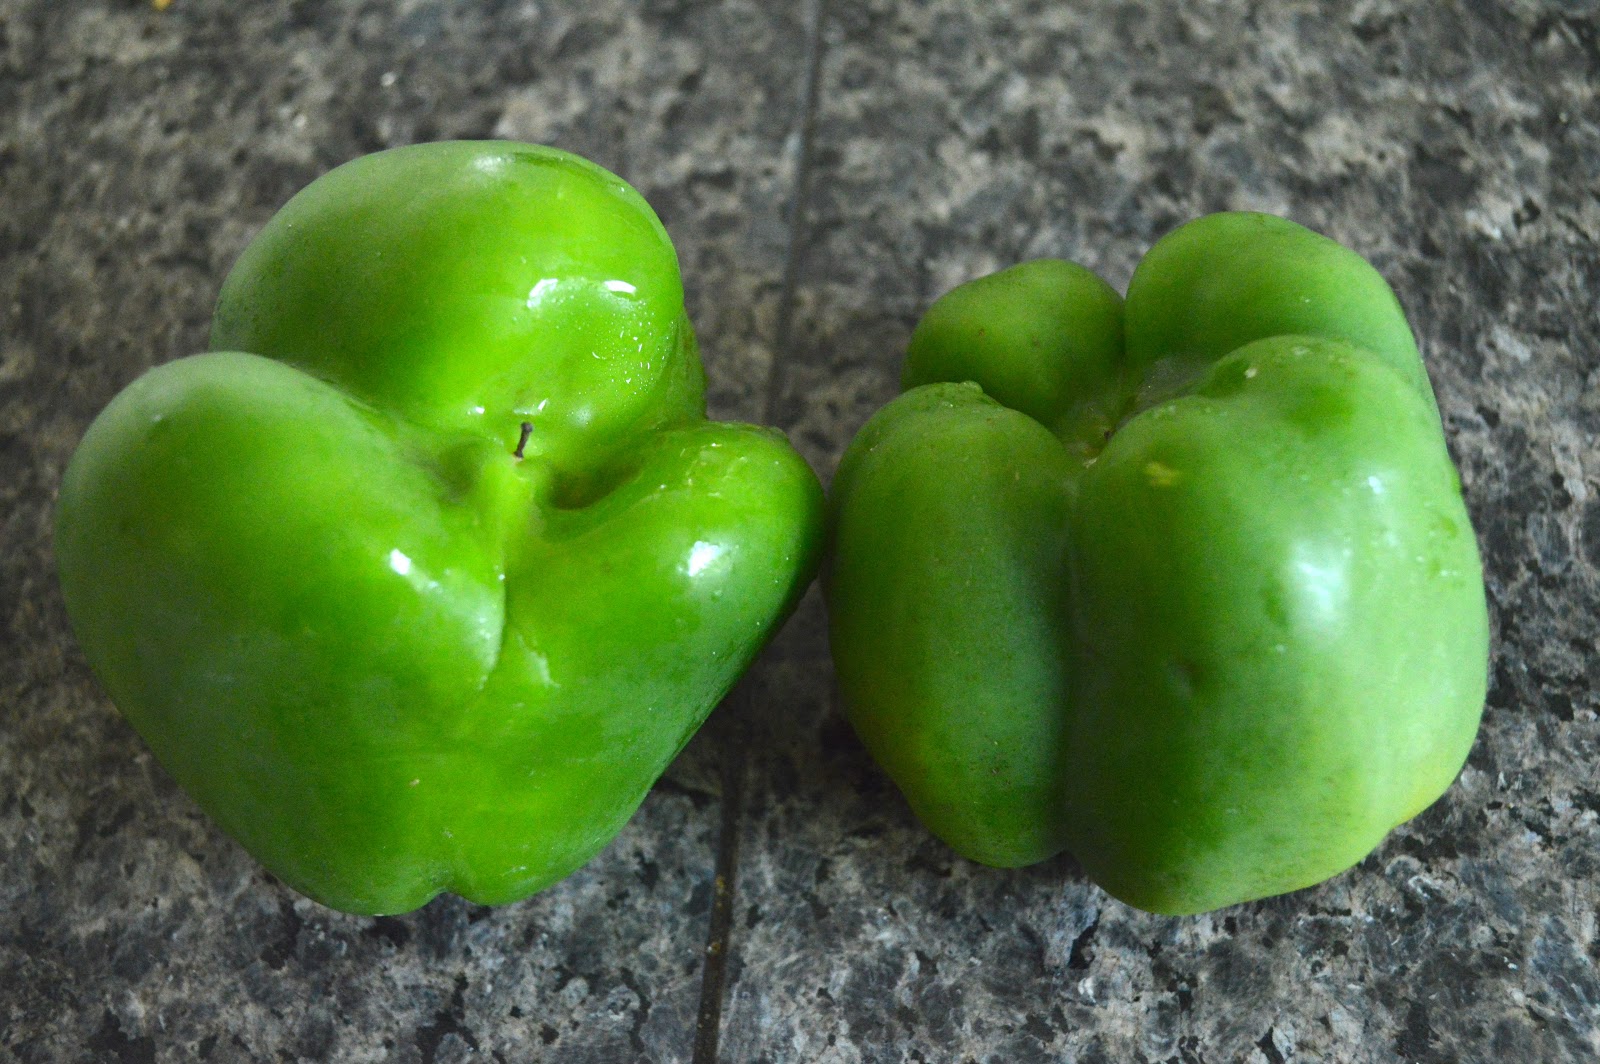 Peppers перламутровые. Male and female Bell Peppers. Green Bell Pepper dish. Pepper Kernels. Bell Pepper and pregnancy.